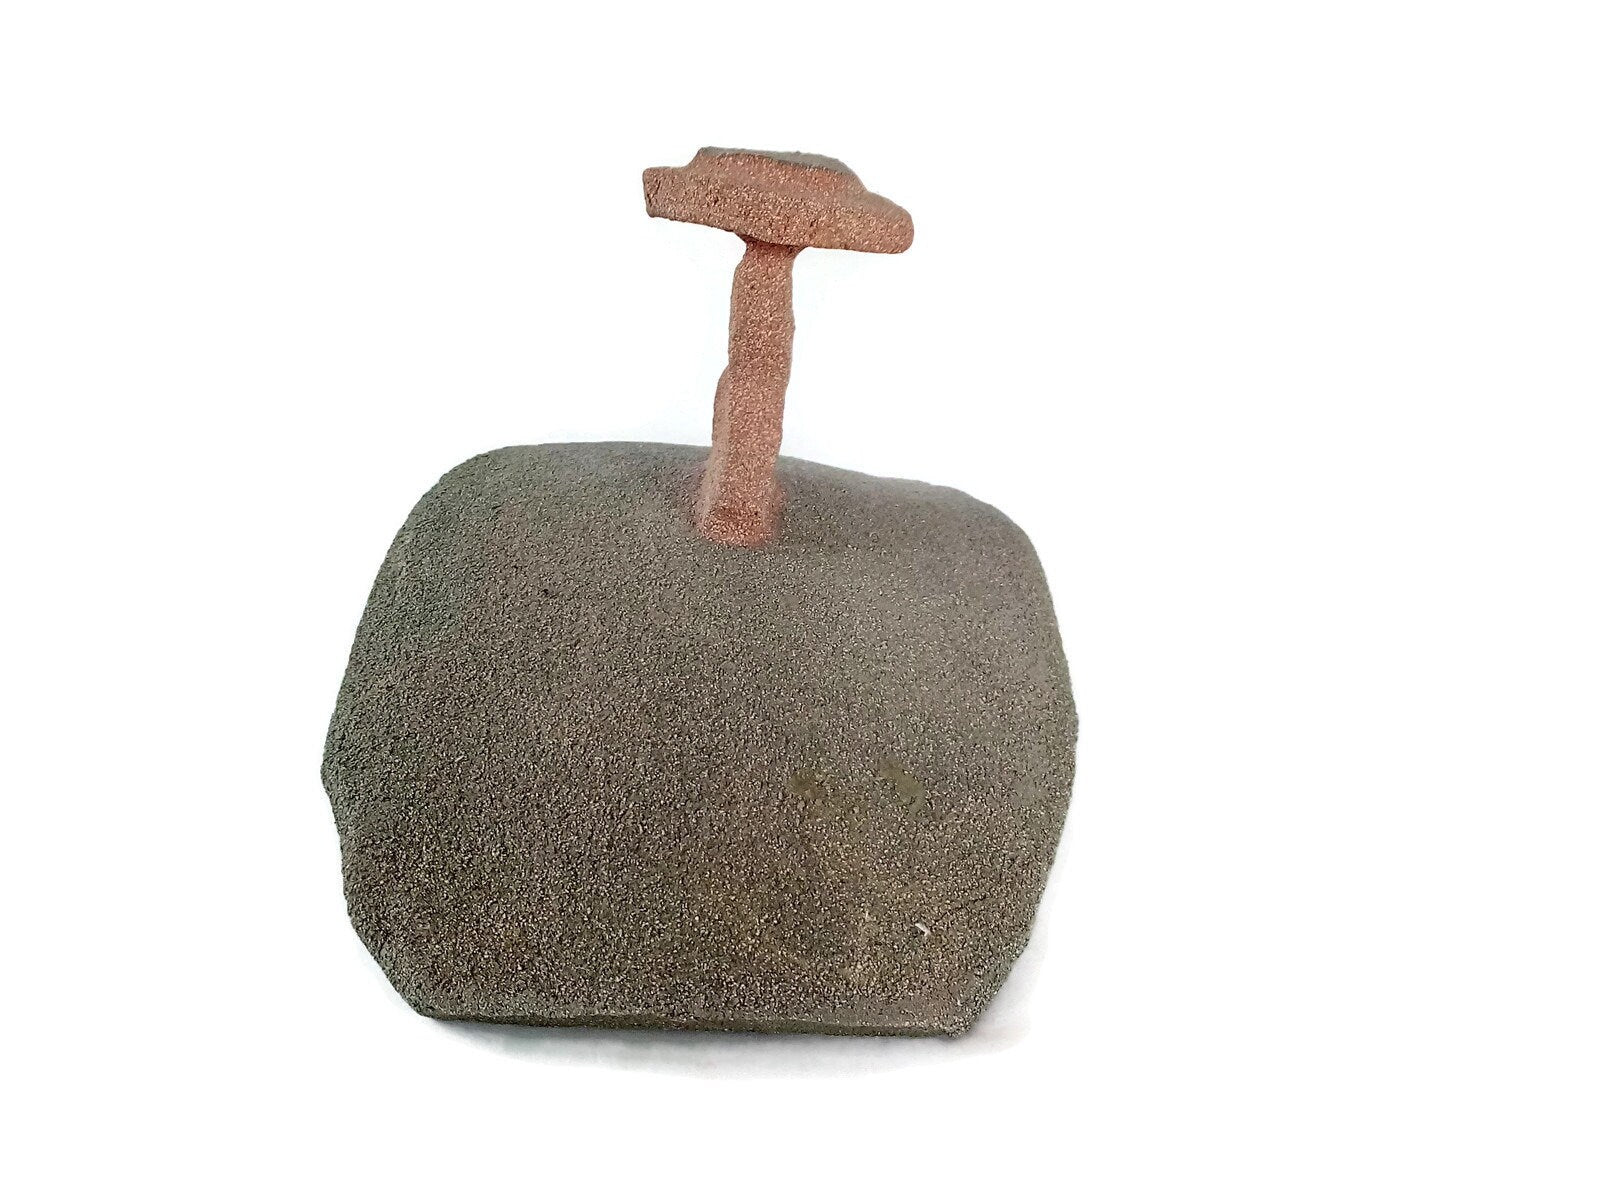 ceramic mushroom sculpture, unique wedding gifts for couple, Best Gifts For Him, office desk accessories for men, Mothers Day Gift Daughter - Ceramica Ana Rafael